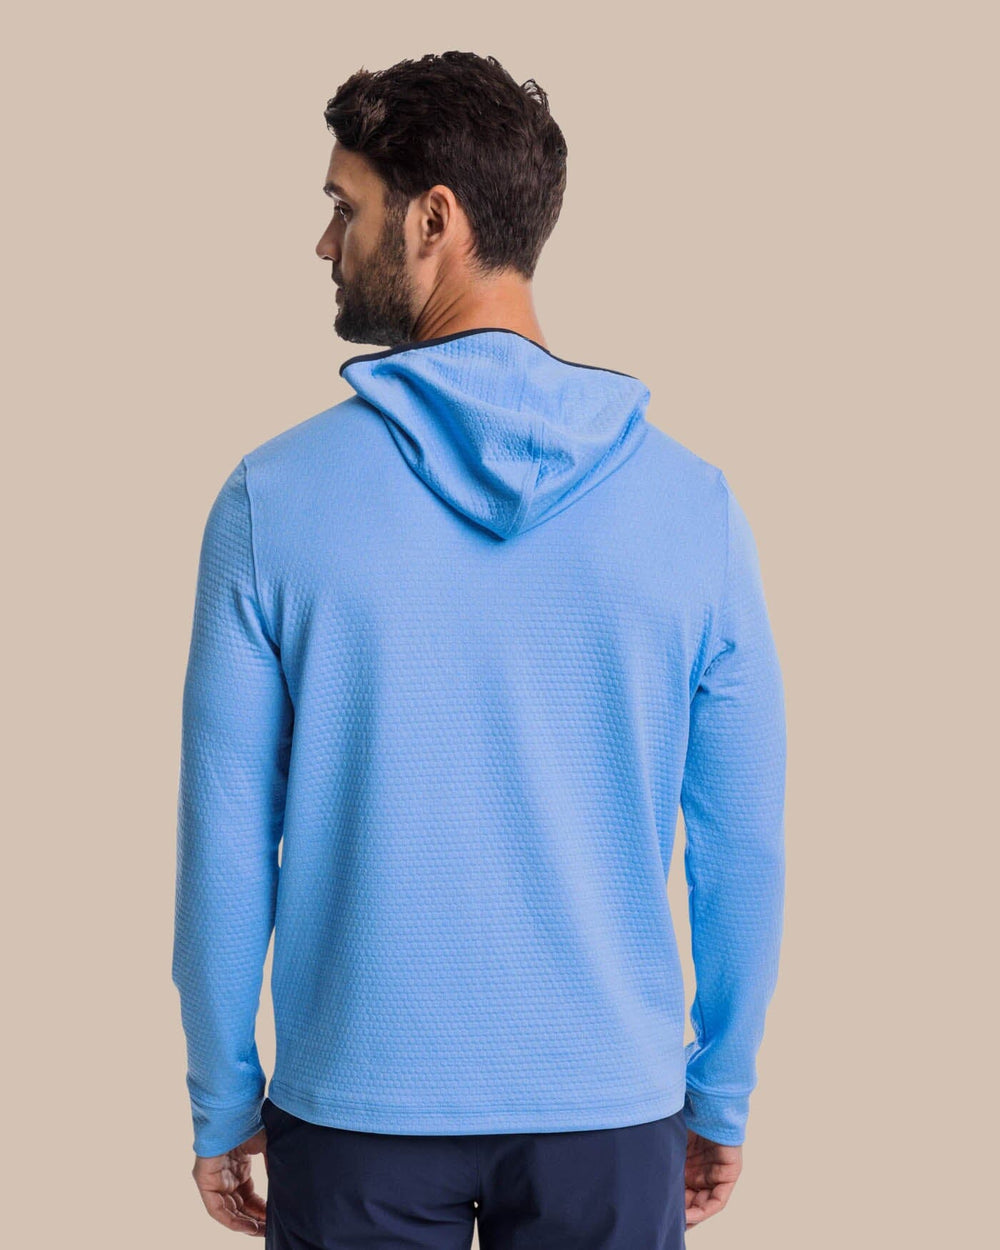 The back view of the Southern Tide Scuttle Heather Performance Quarter Zip Hoodie by Southern Tide - Heather Boat Blue